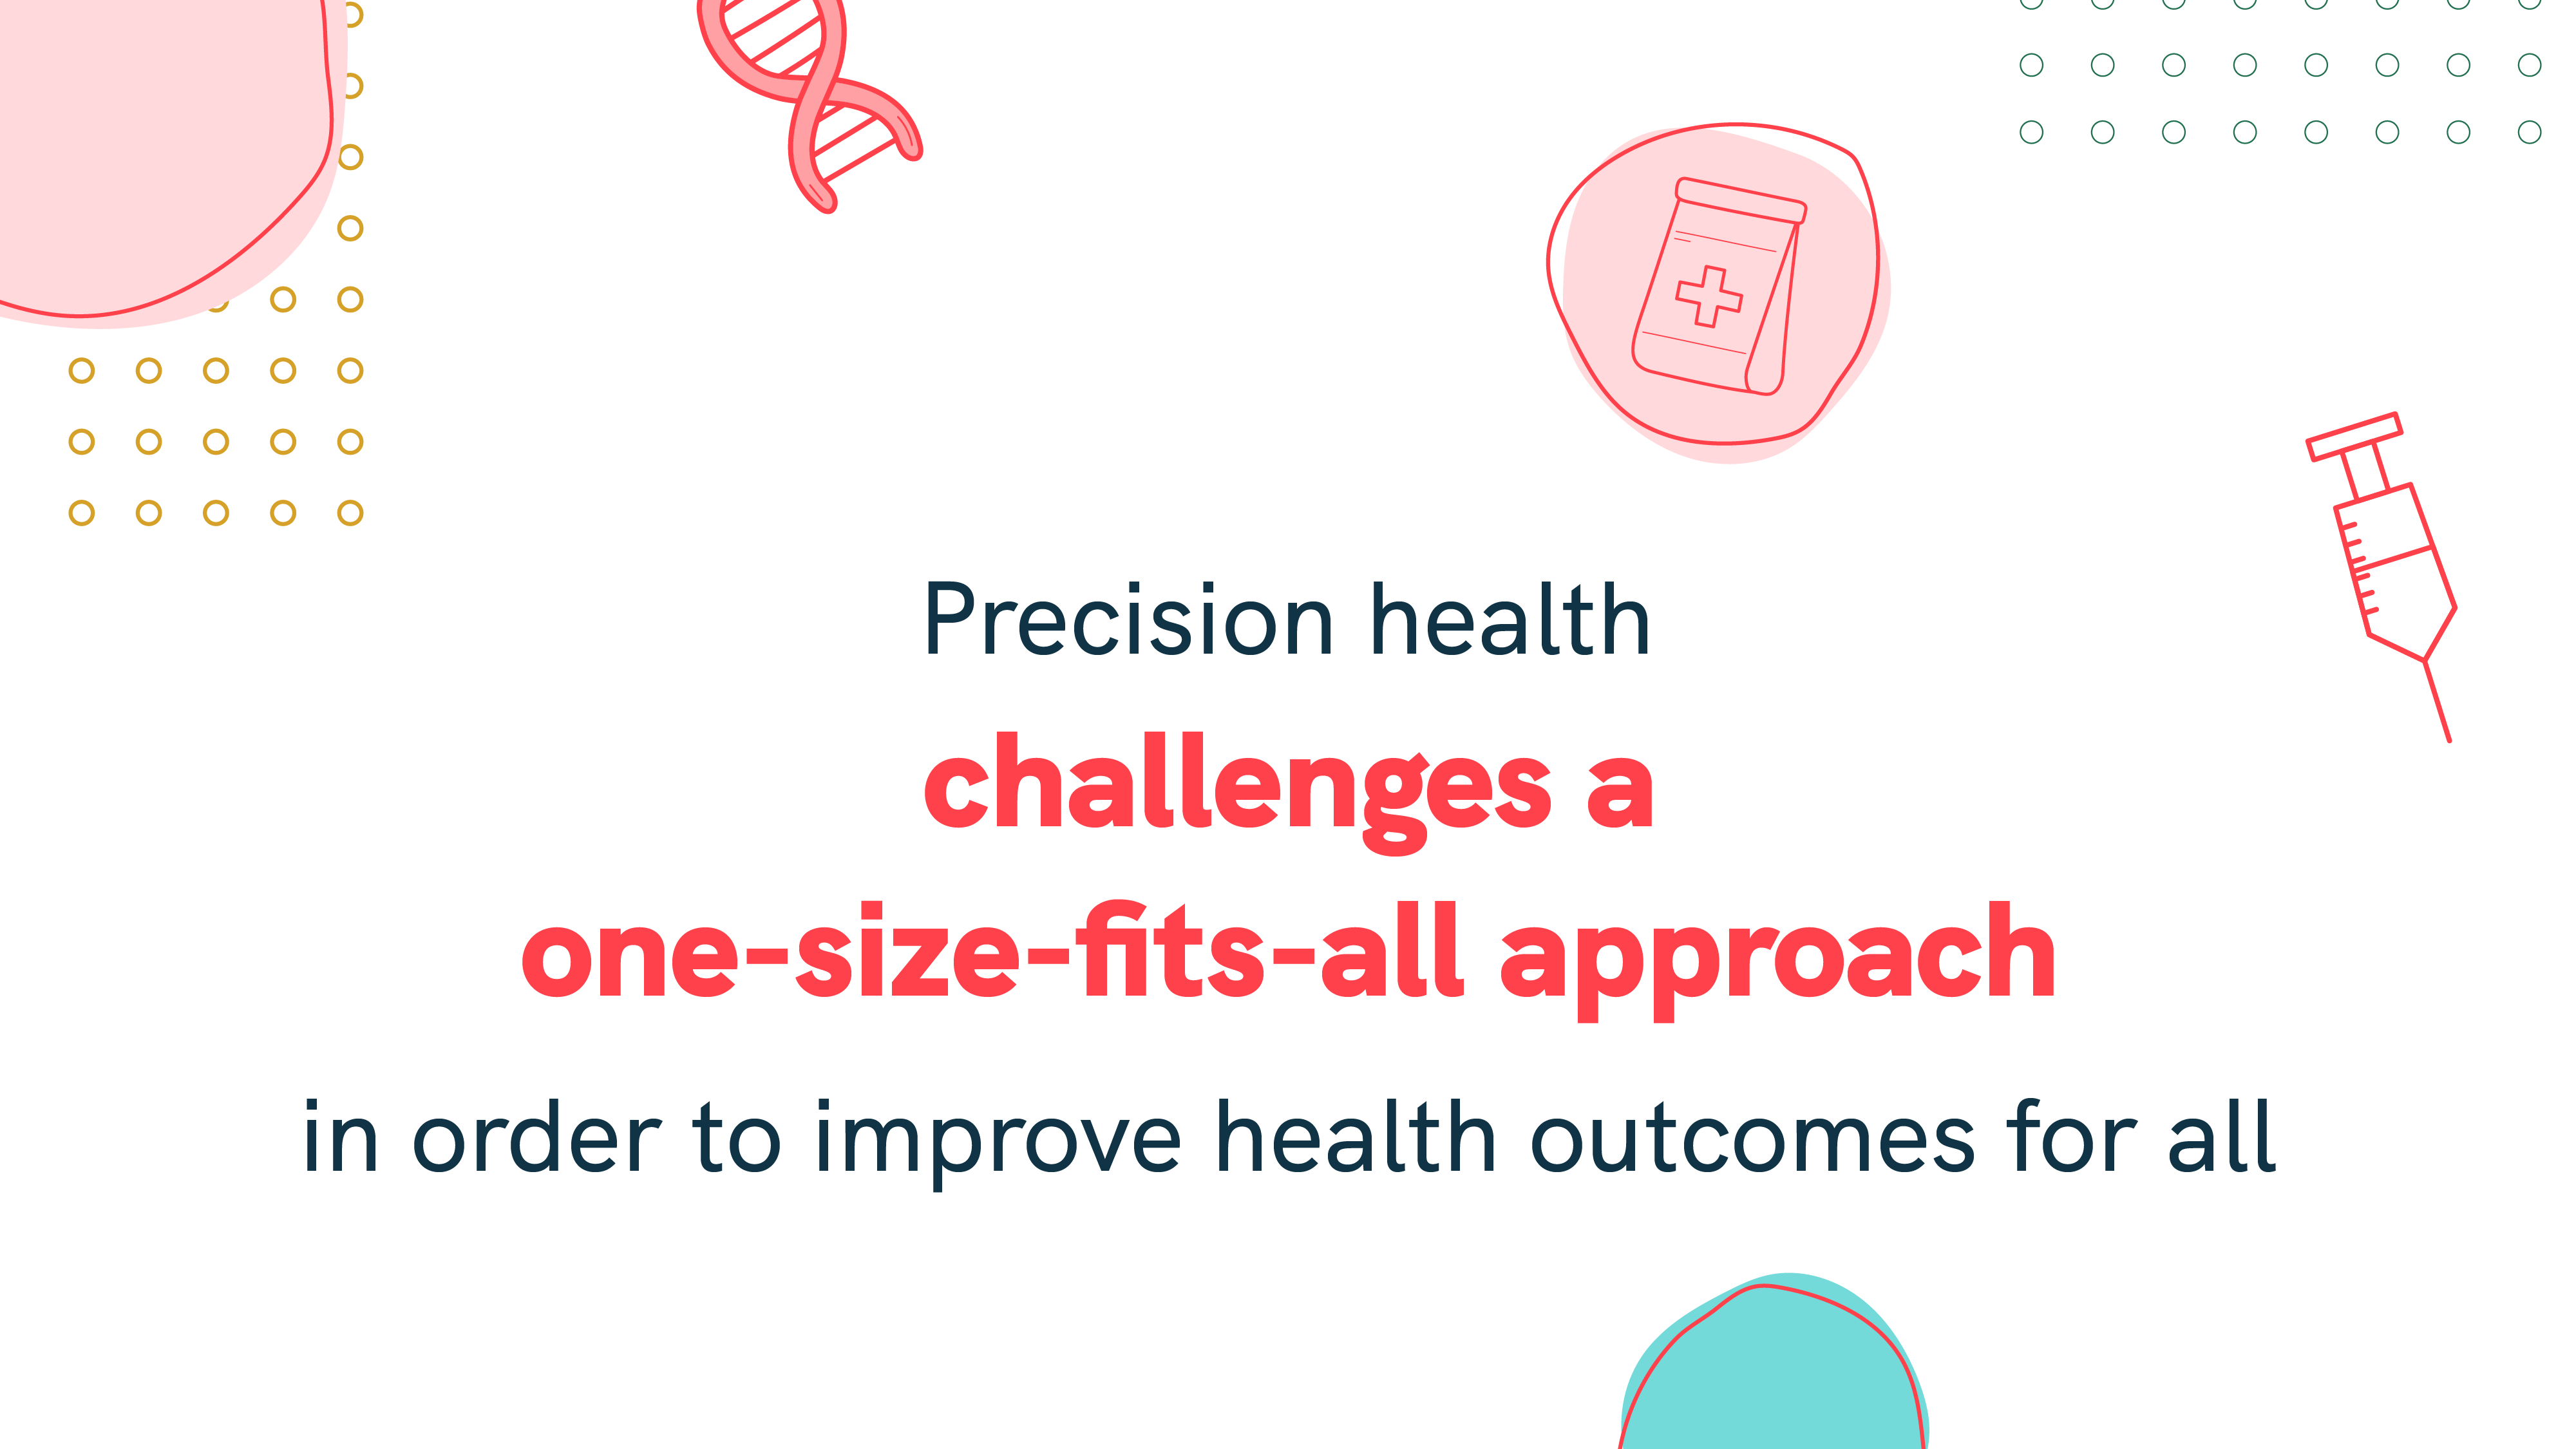 Precision health accounts for differences in people’s genes, environments and lifestyles to tailor better prevention strategies and treatments for an individual